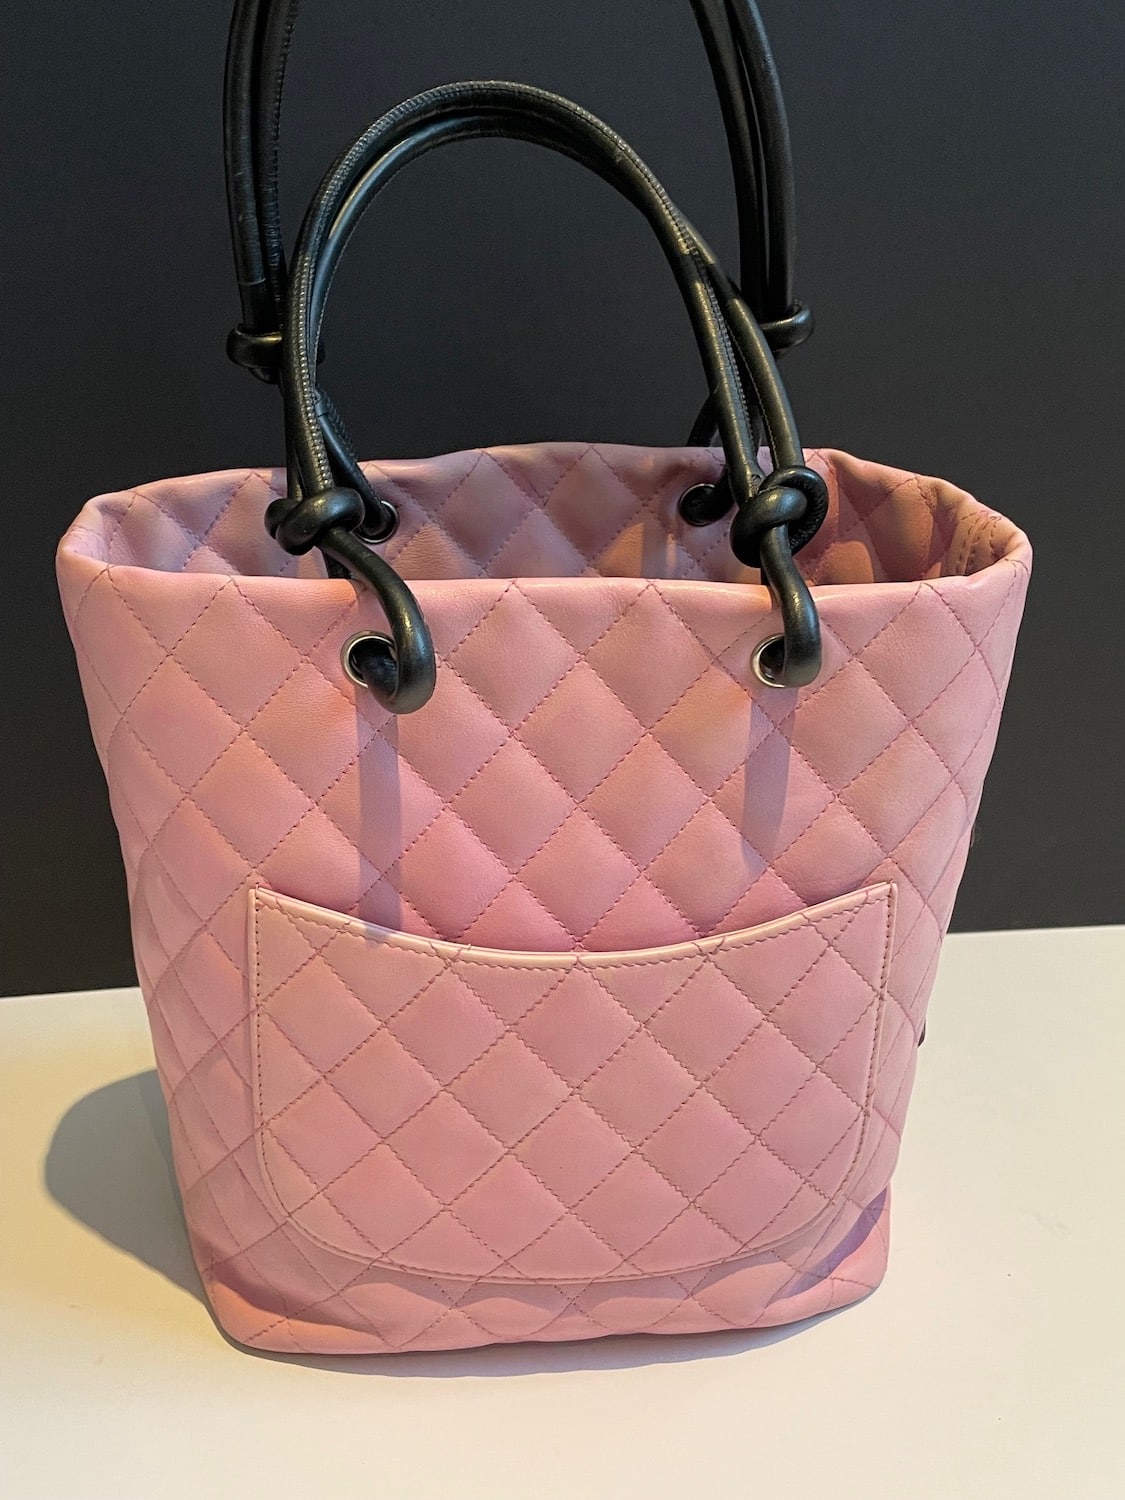 CHANEL Pink & Black Quilted Calfskin Leather Small Cambon CC Logo Bag C. 2004-2005